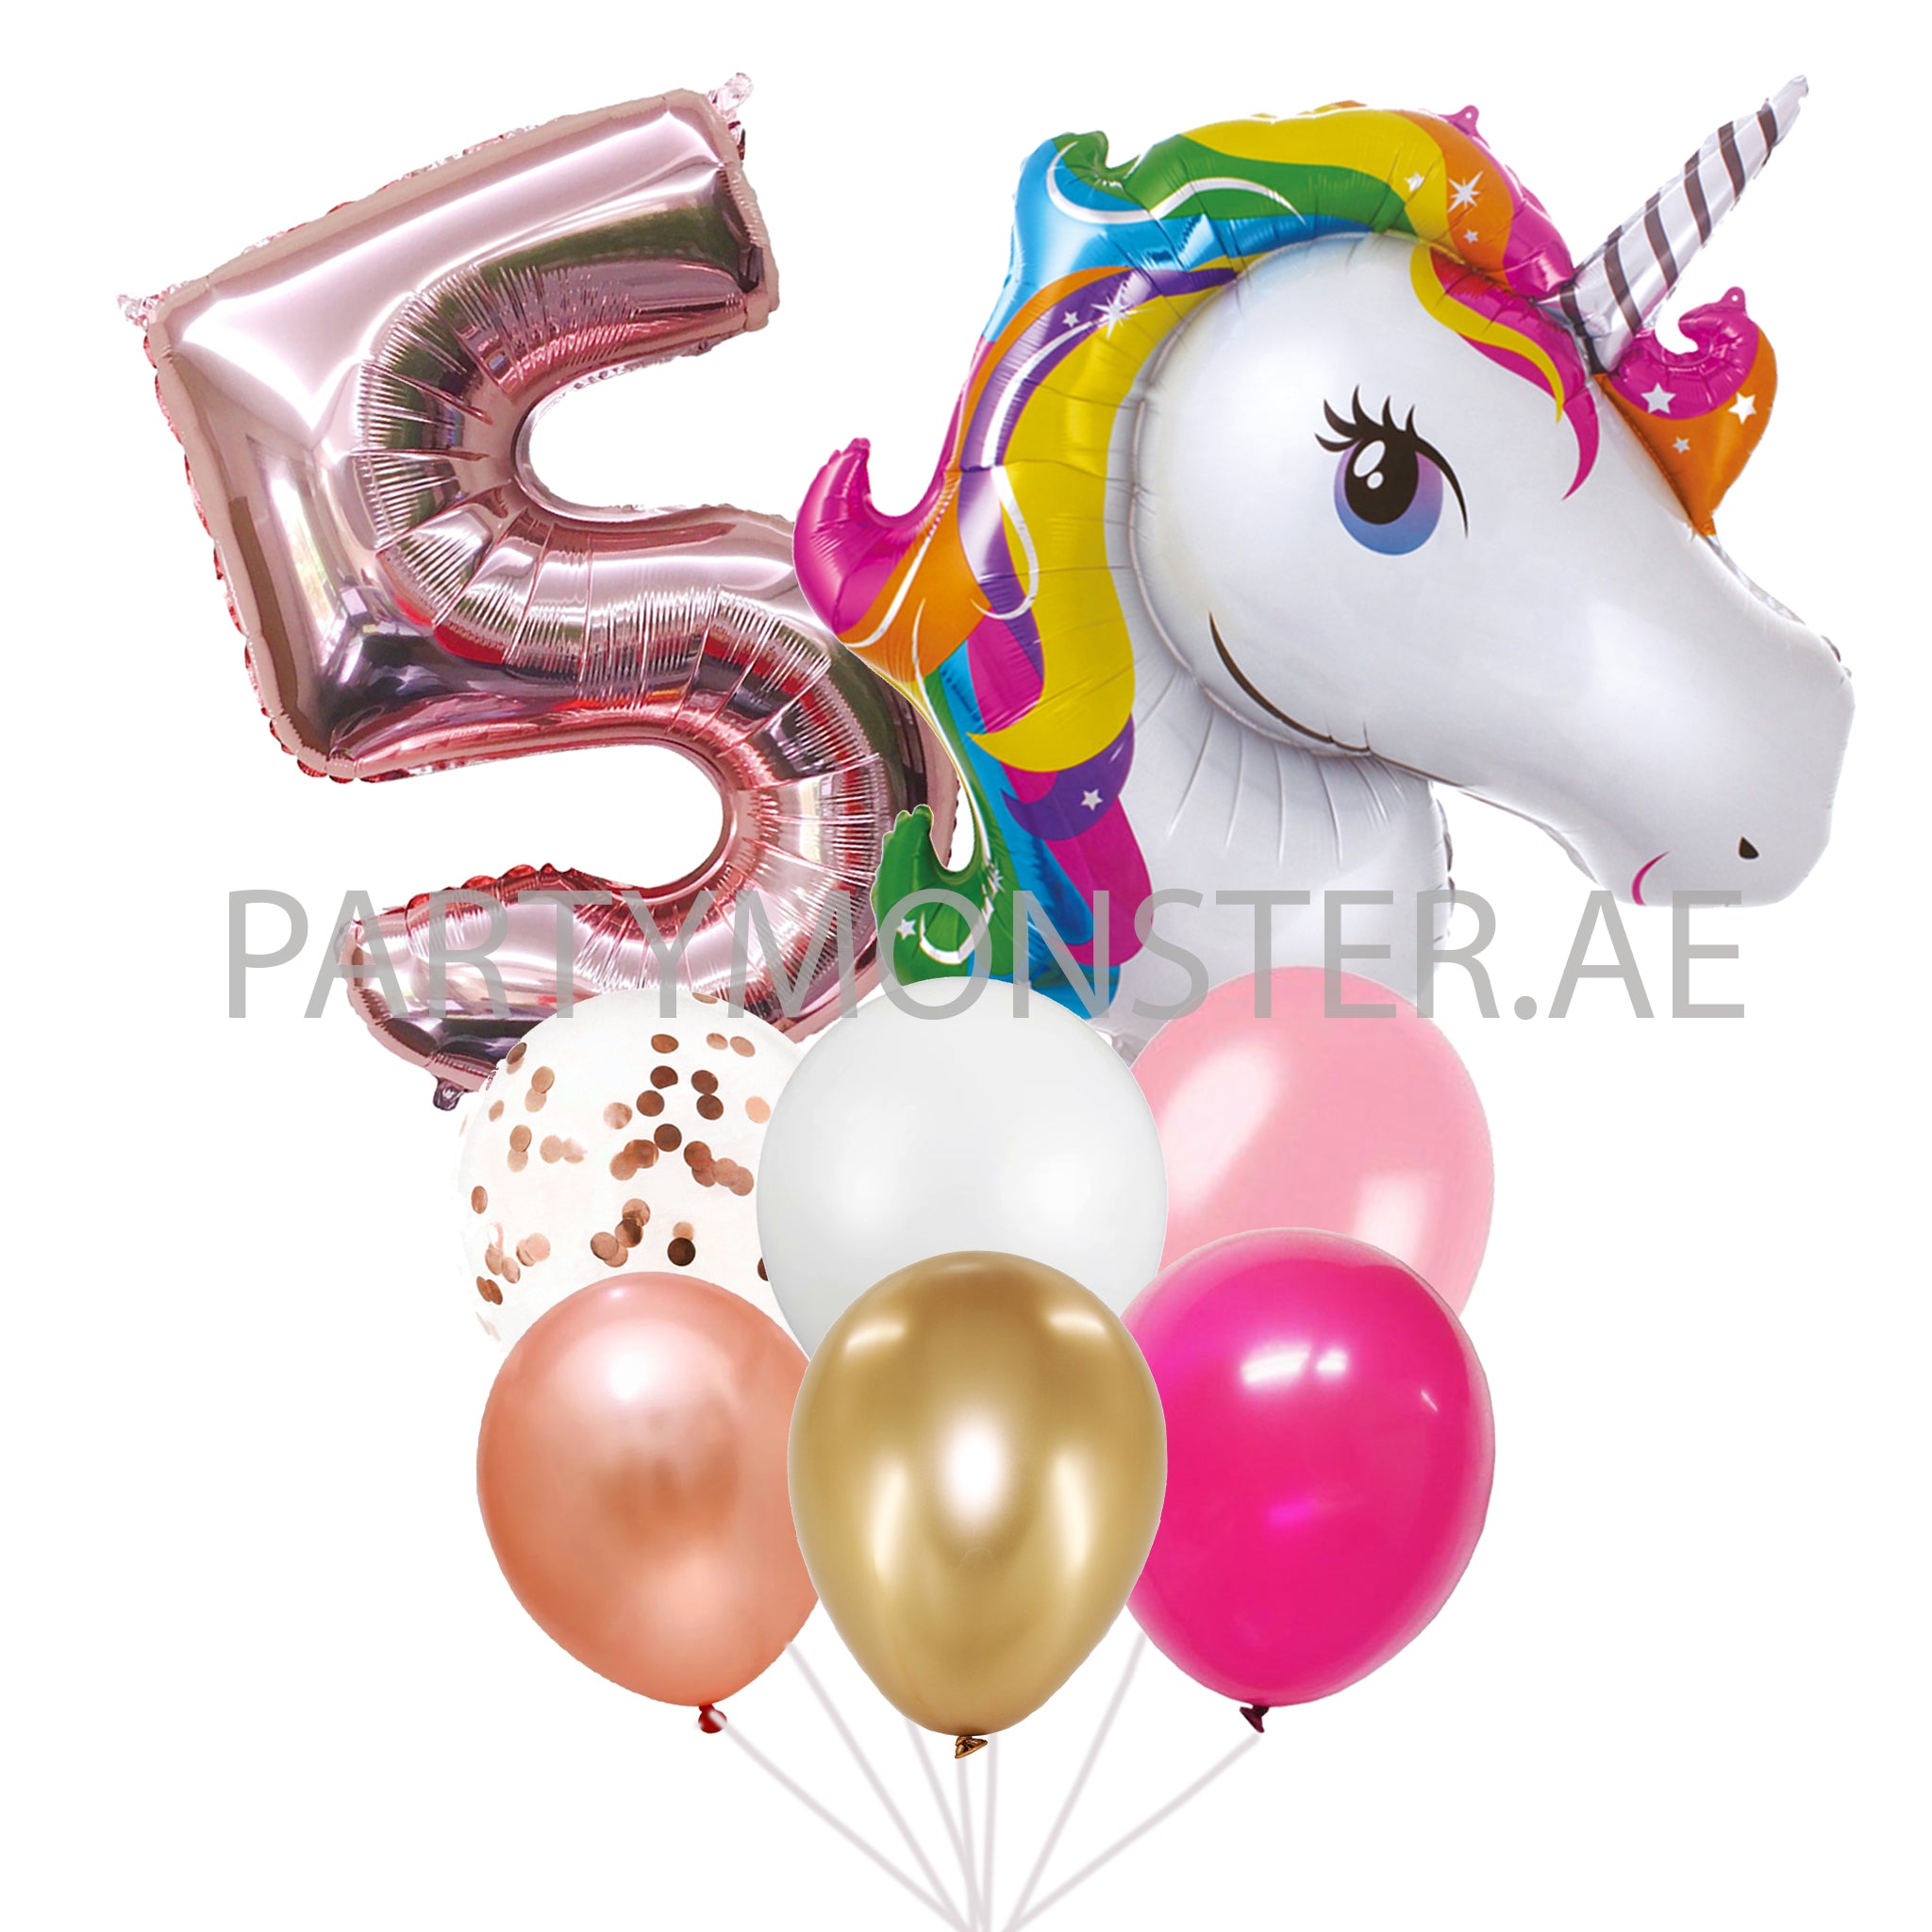 Unicorn with any number balloons bouquet - PartyMonster.ae